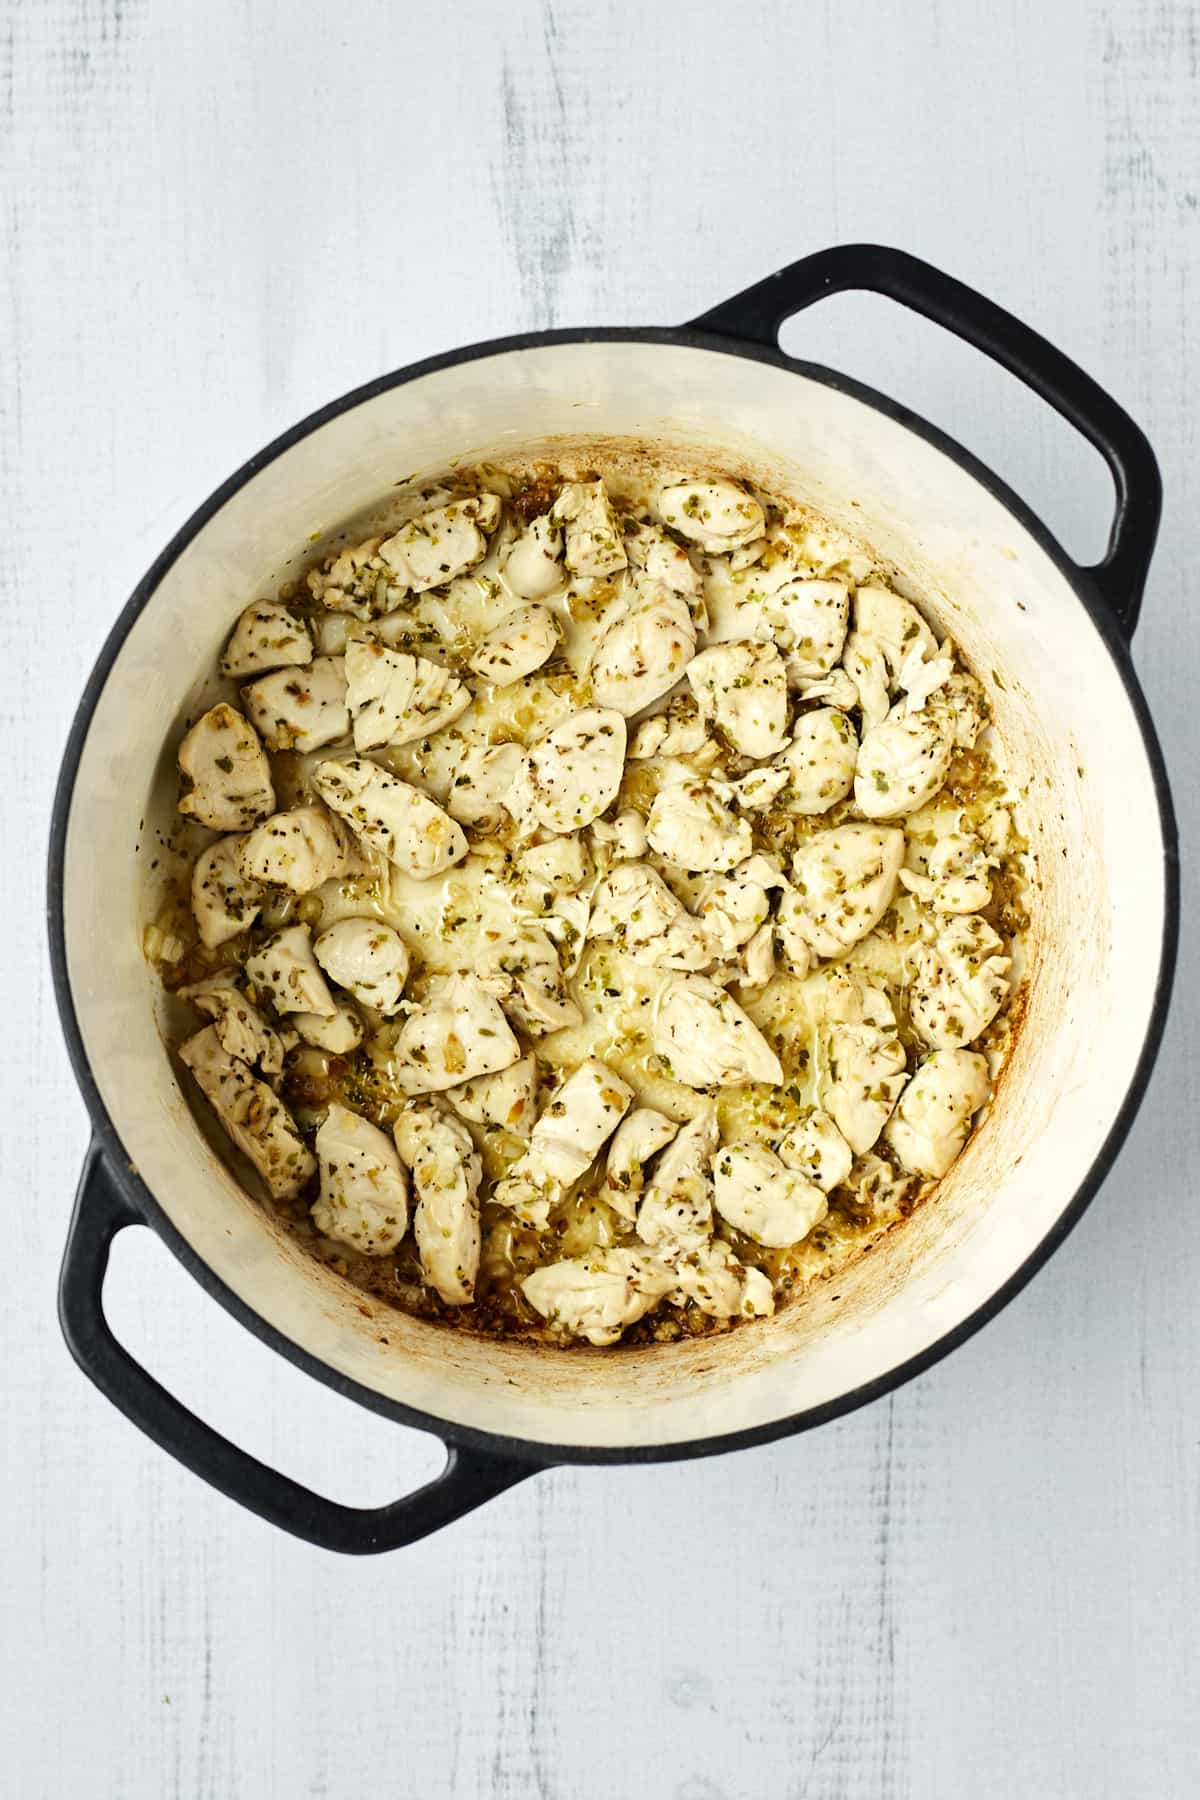 Cooked, seasoned chicken in a large pot.